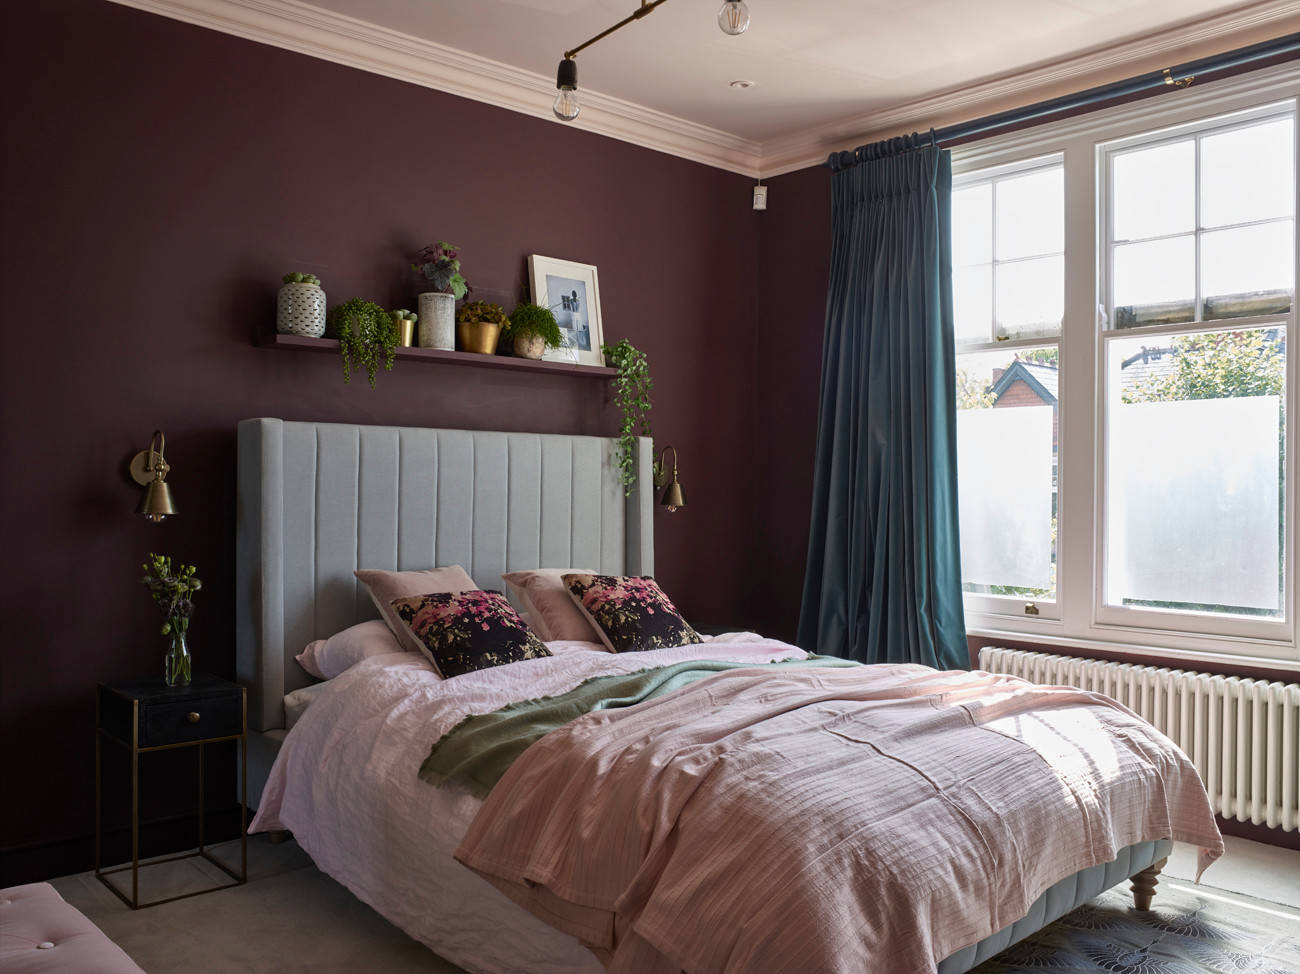 75 Bedroom with Purple Walls Ideas You'll Love - August, 2023 | Houzz